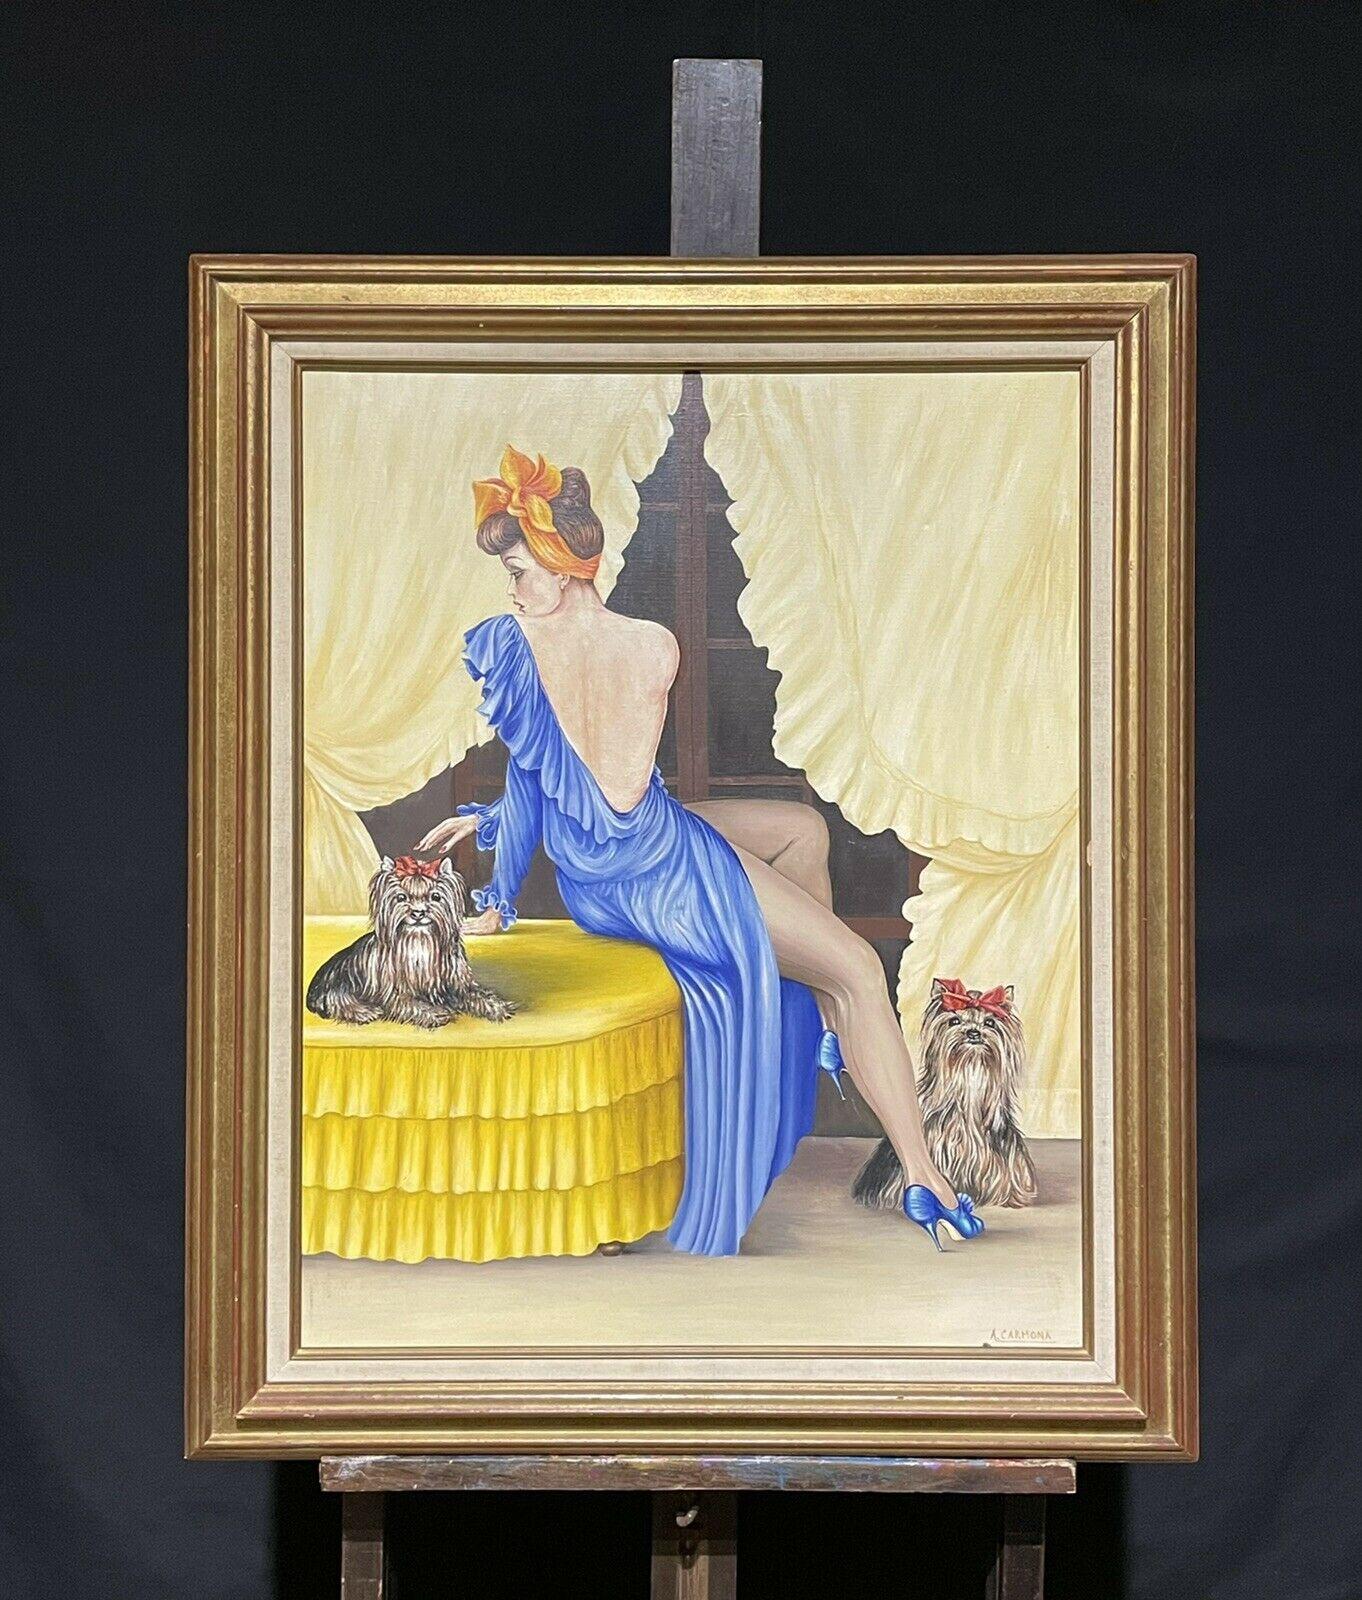 LARGE 20TH CENTURY FRENCH SIGNED OIL - ELEGANT MODEL WITH DOGS IN INTERIOR - Pop Art Painting by Unknown